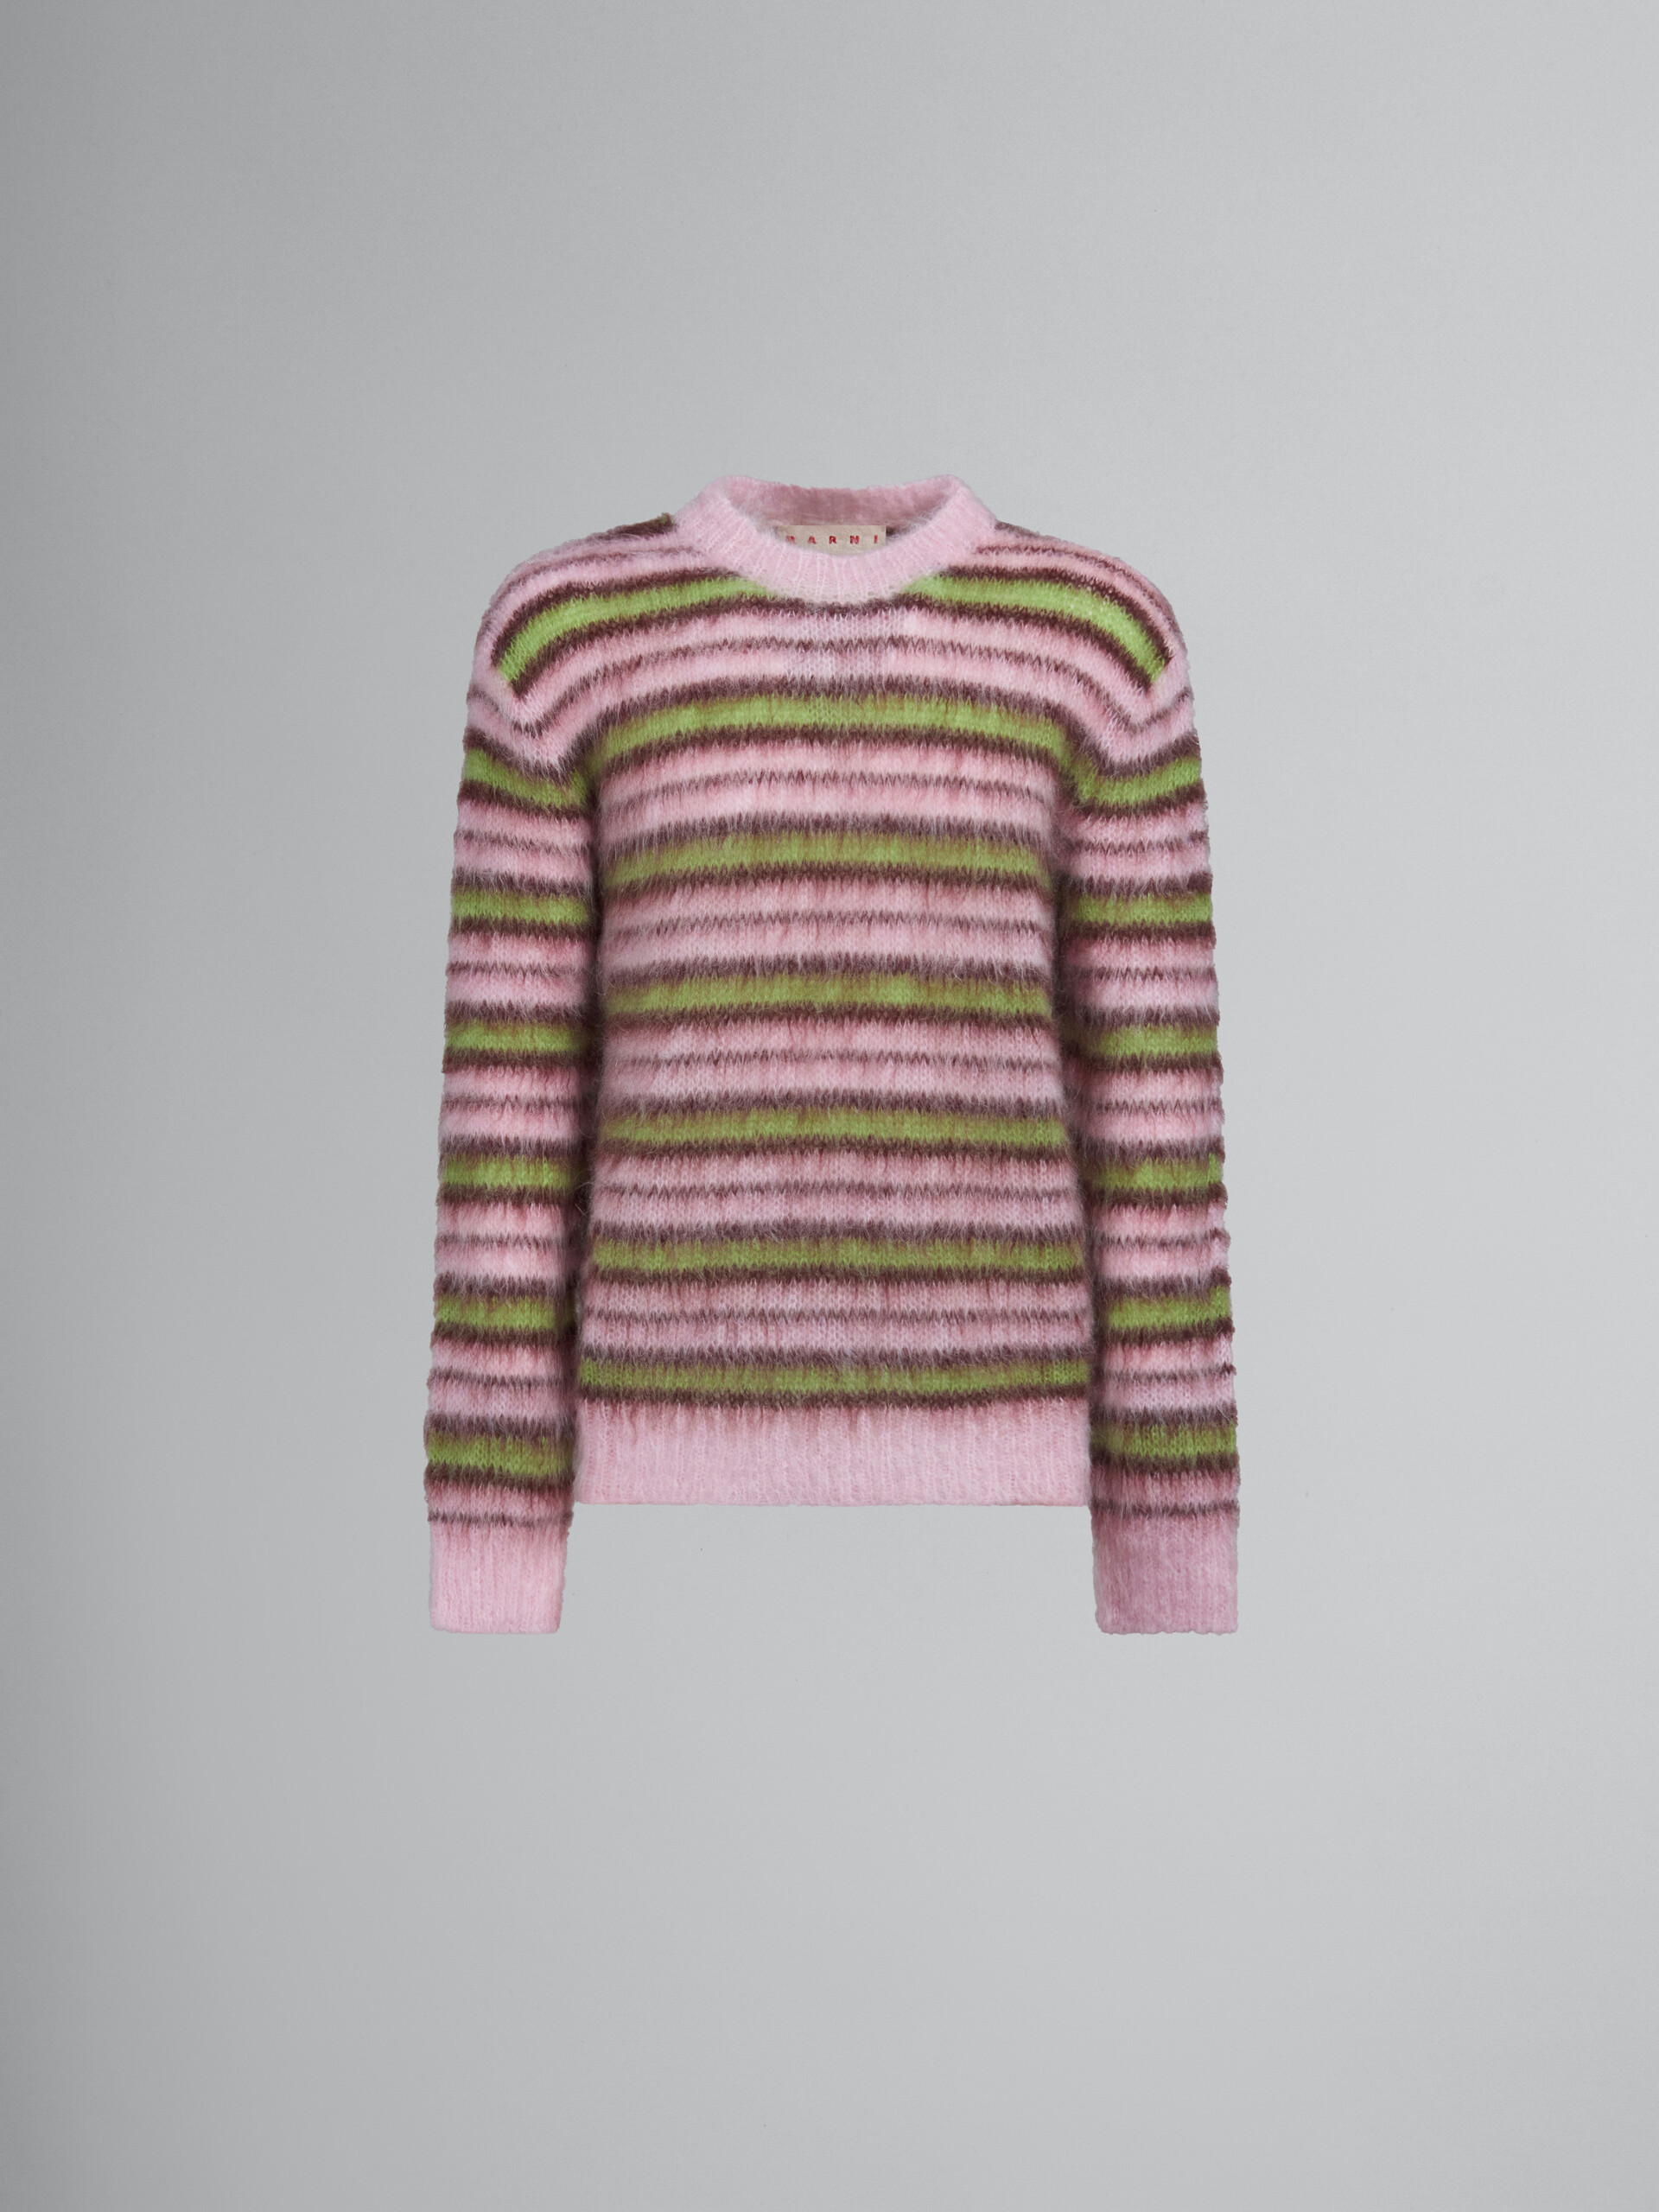 Turquoise striped mohair sweater - Pullovers - Image 1